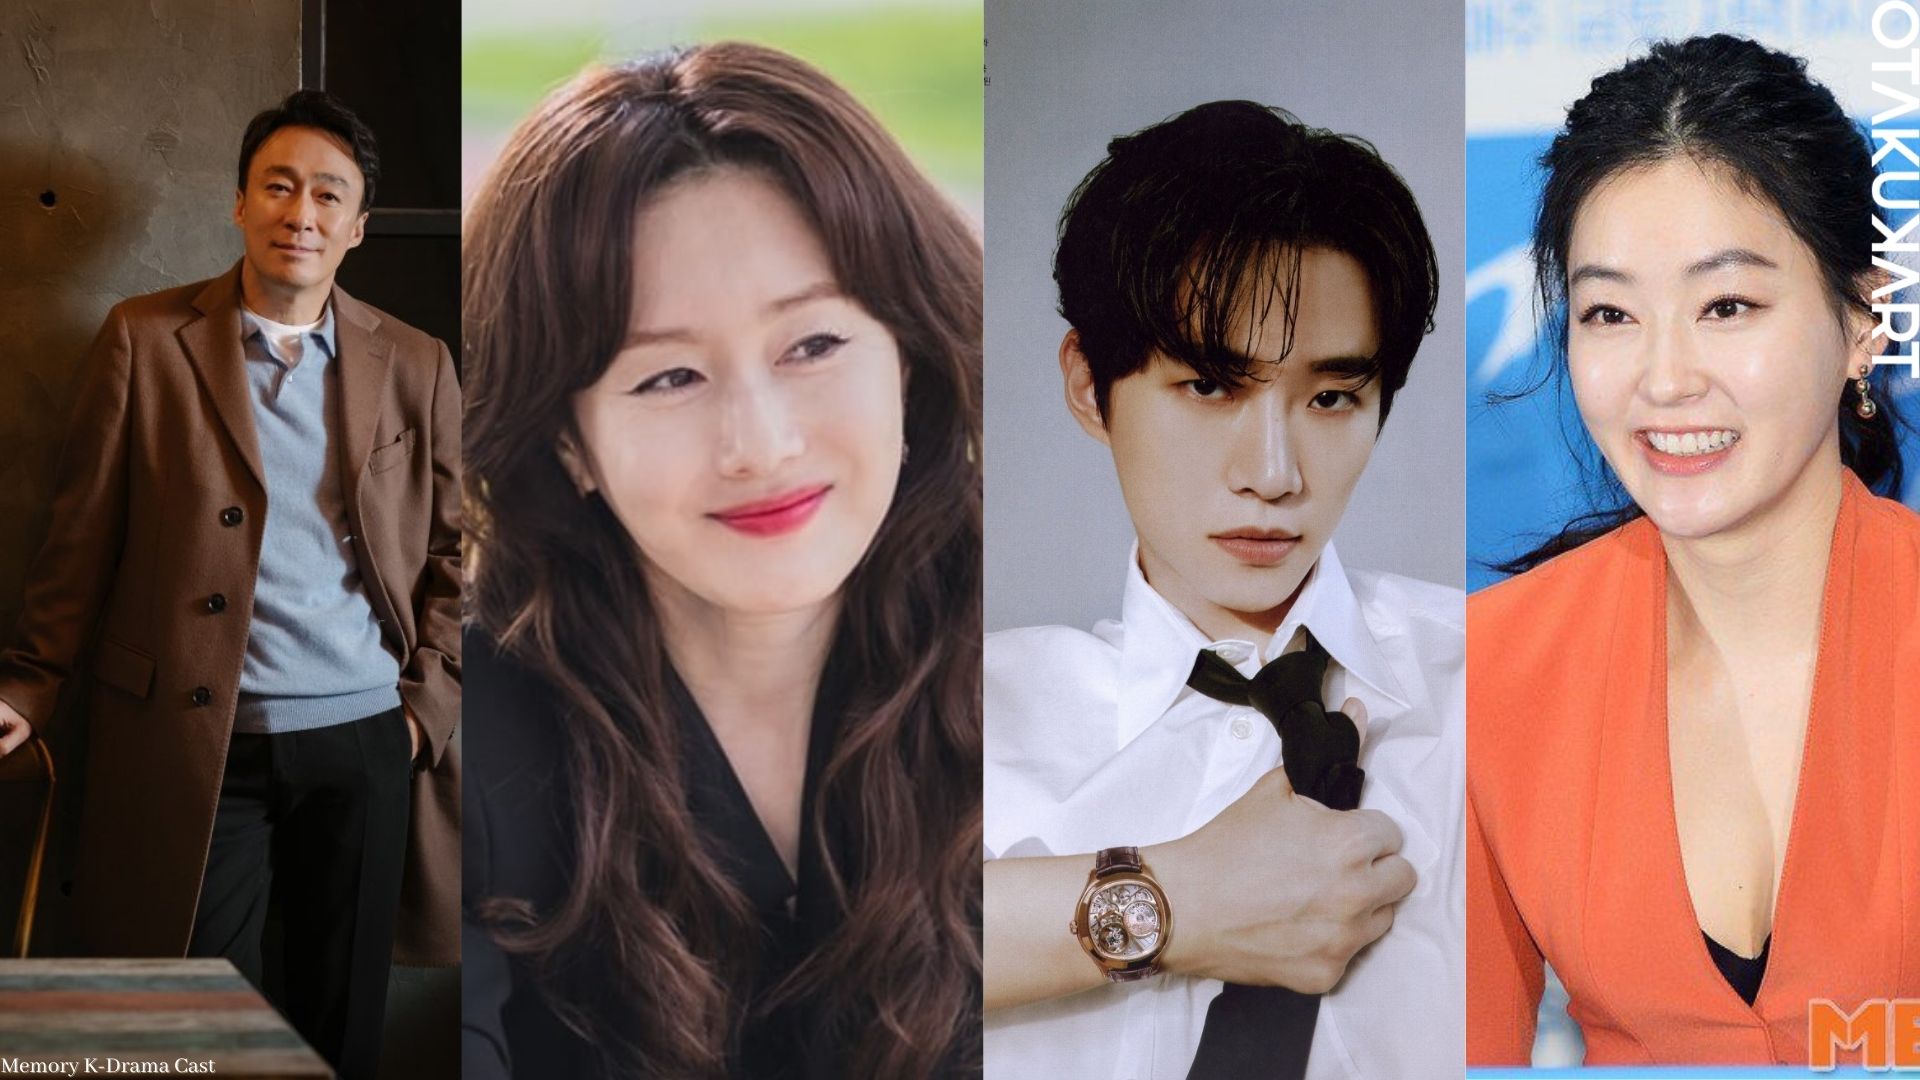 Memory K-Drama Cast – Where Are They Now?